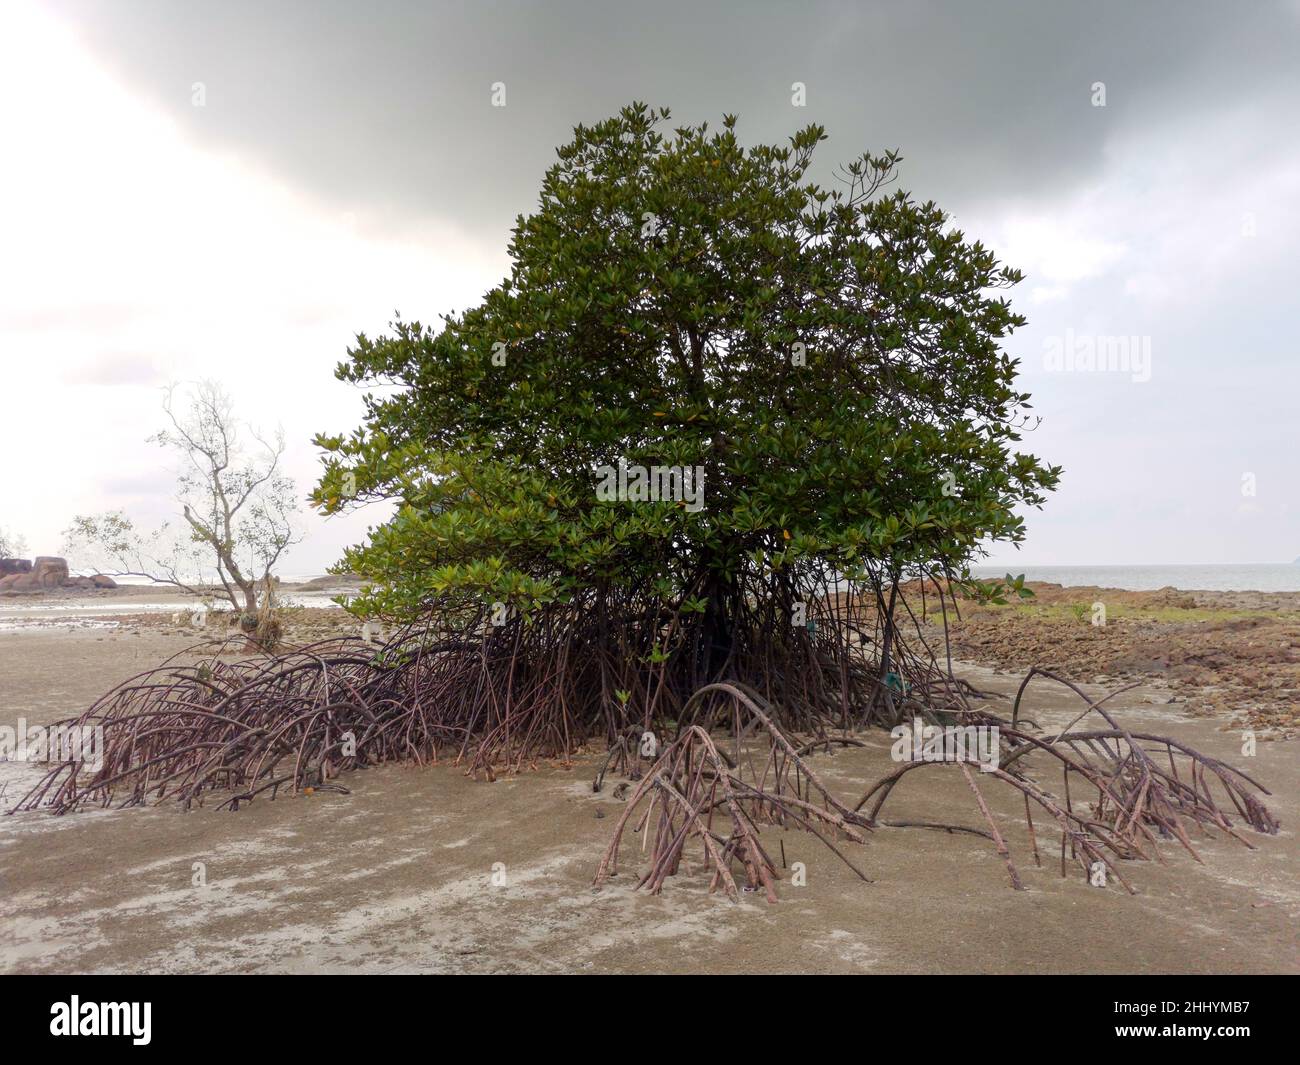 Single lonely mangrove tree on the deforested mangrove forest beach during low tide period with dead trees and cloudy sky, Endau, Malaysia Stock Photo